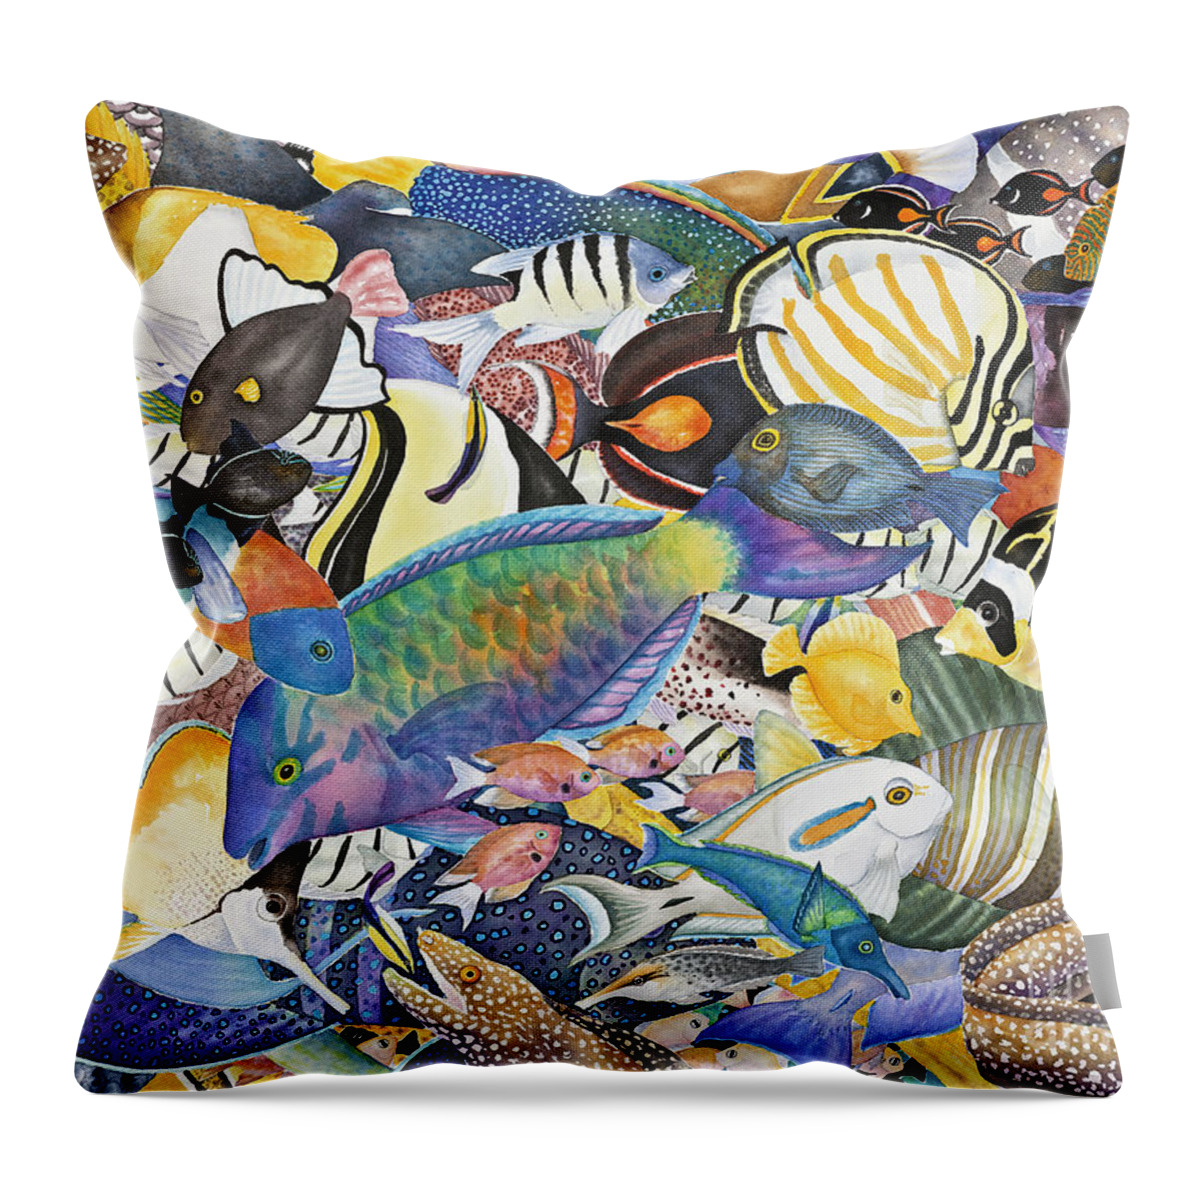 Fish Throw Pillow featuring the painting Kona Crowd by Lucy Arnold